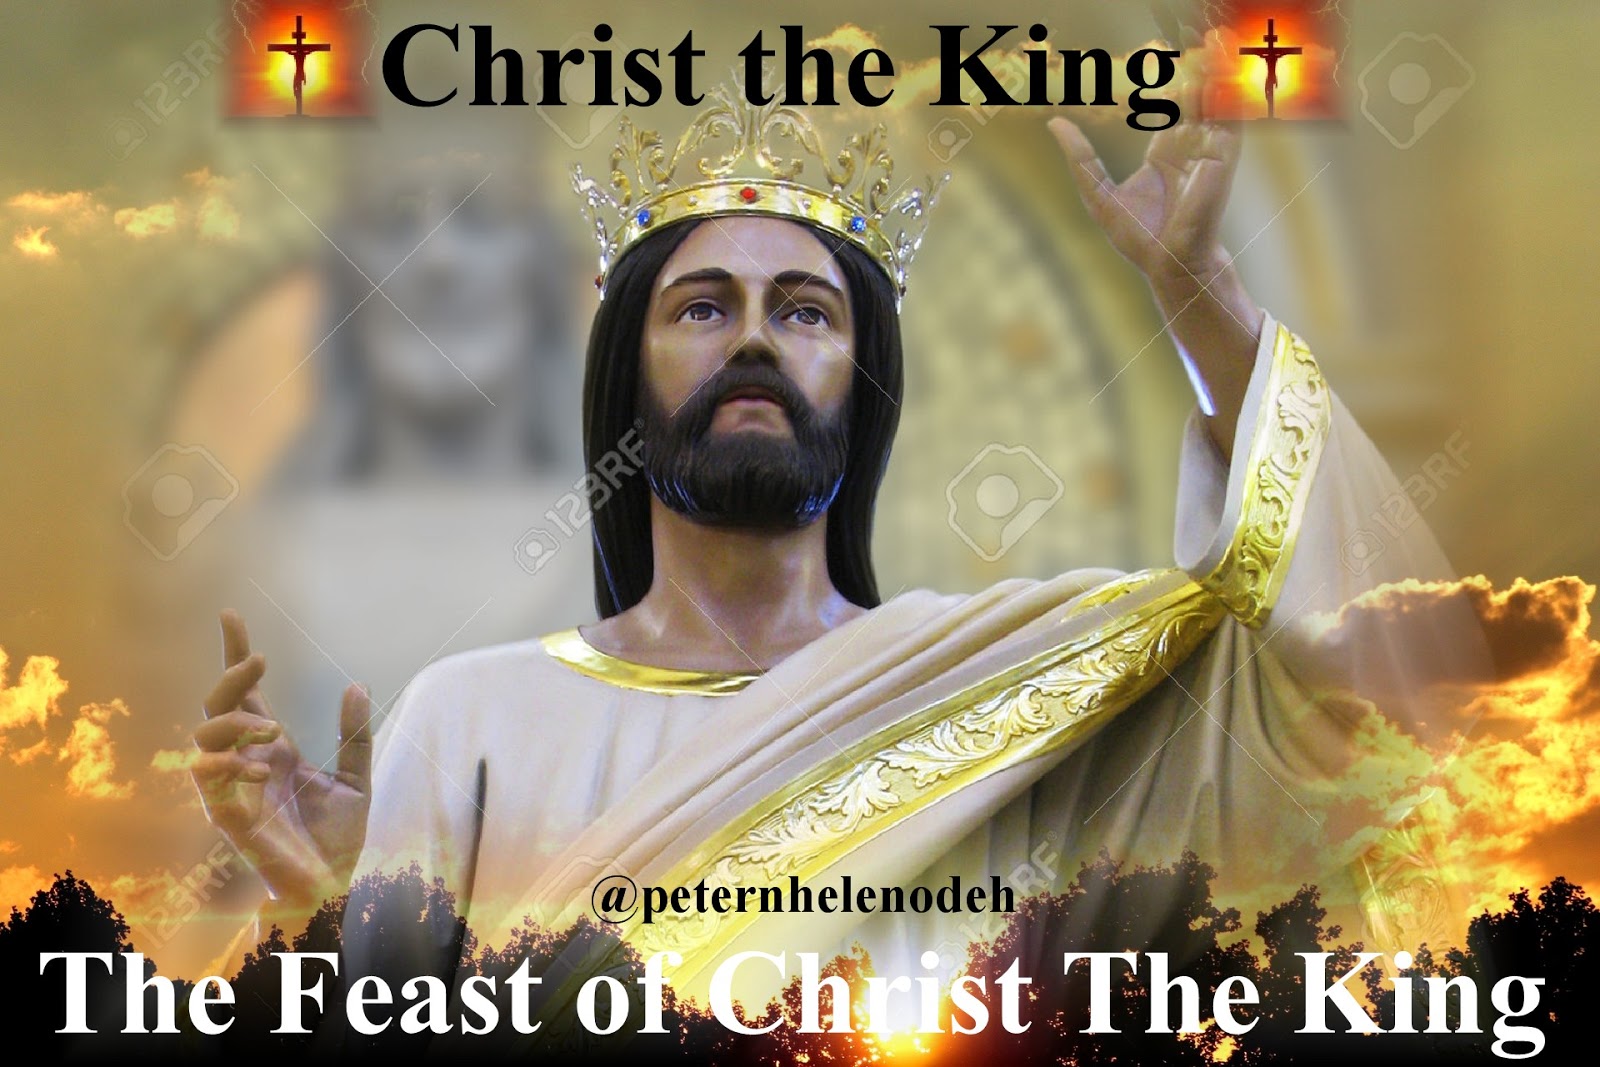 FocusInLove: The Feast of Christ the King and Year of Mercy